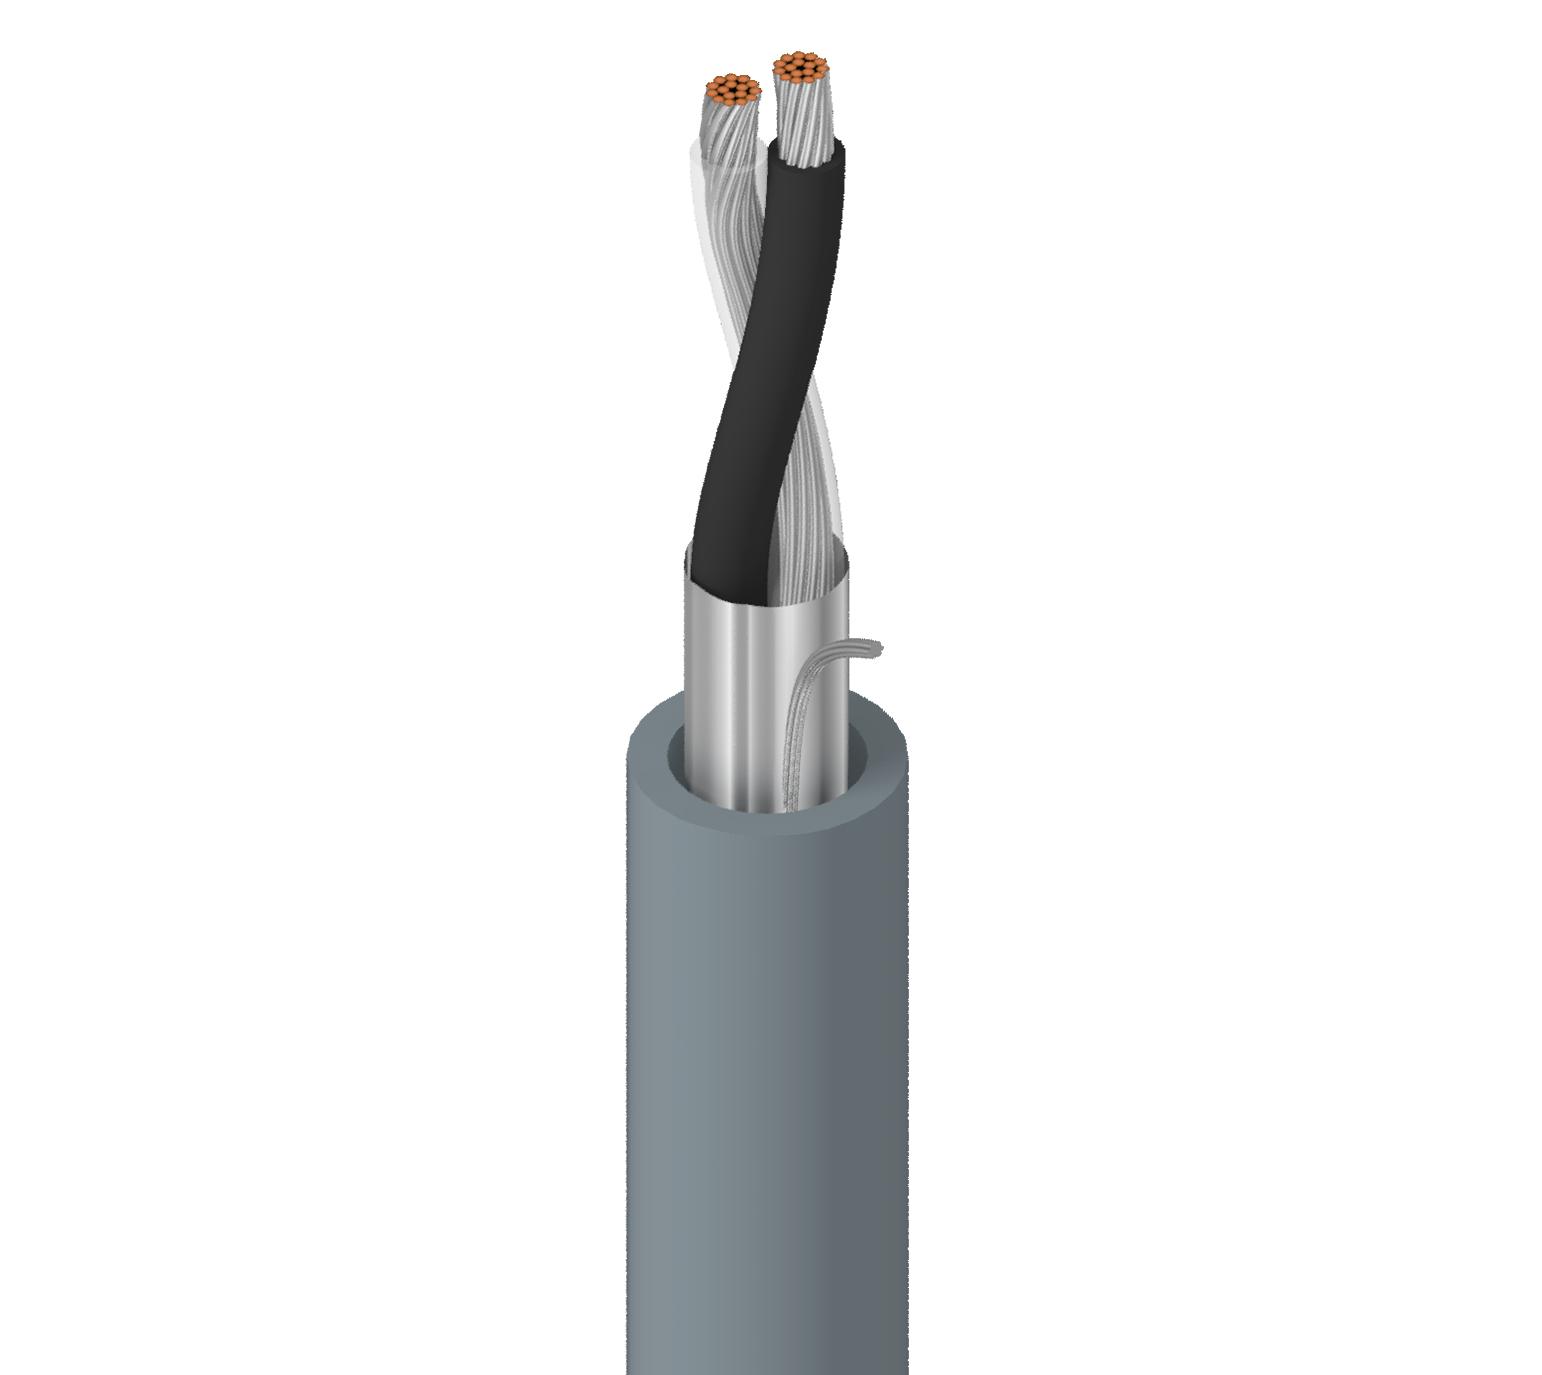 Belden 8760 18 AWG stranded cable, (16x30) tinned copper conductors, polyethylene insulation, twisted pair, overall Beldfoil® shield (100% coverage), 20 AWG stranded tinned copper drain wire, PVC jacket.